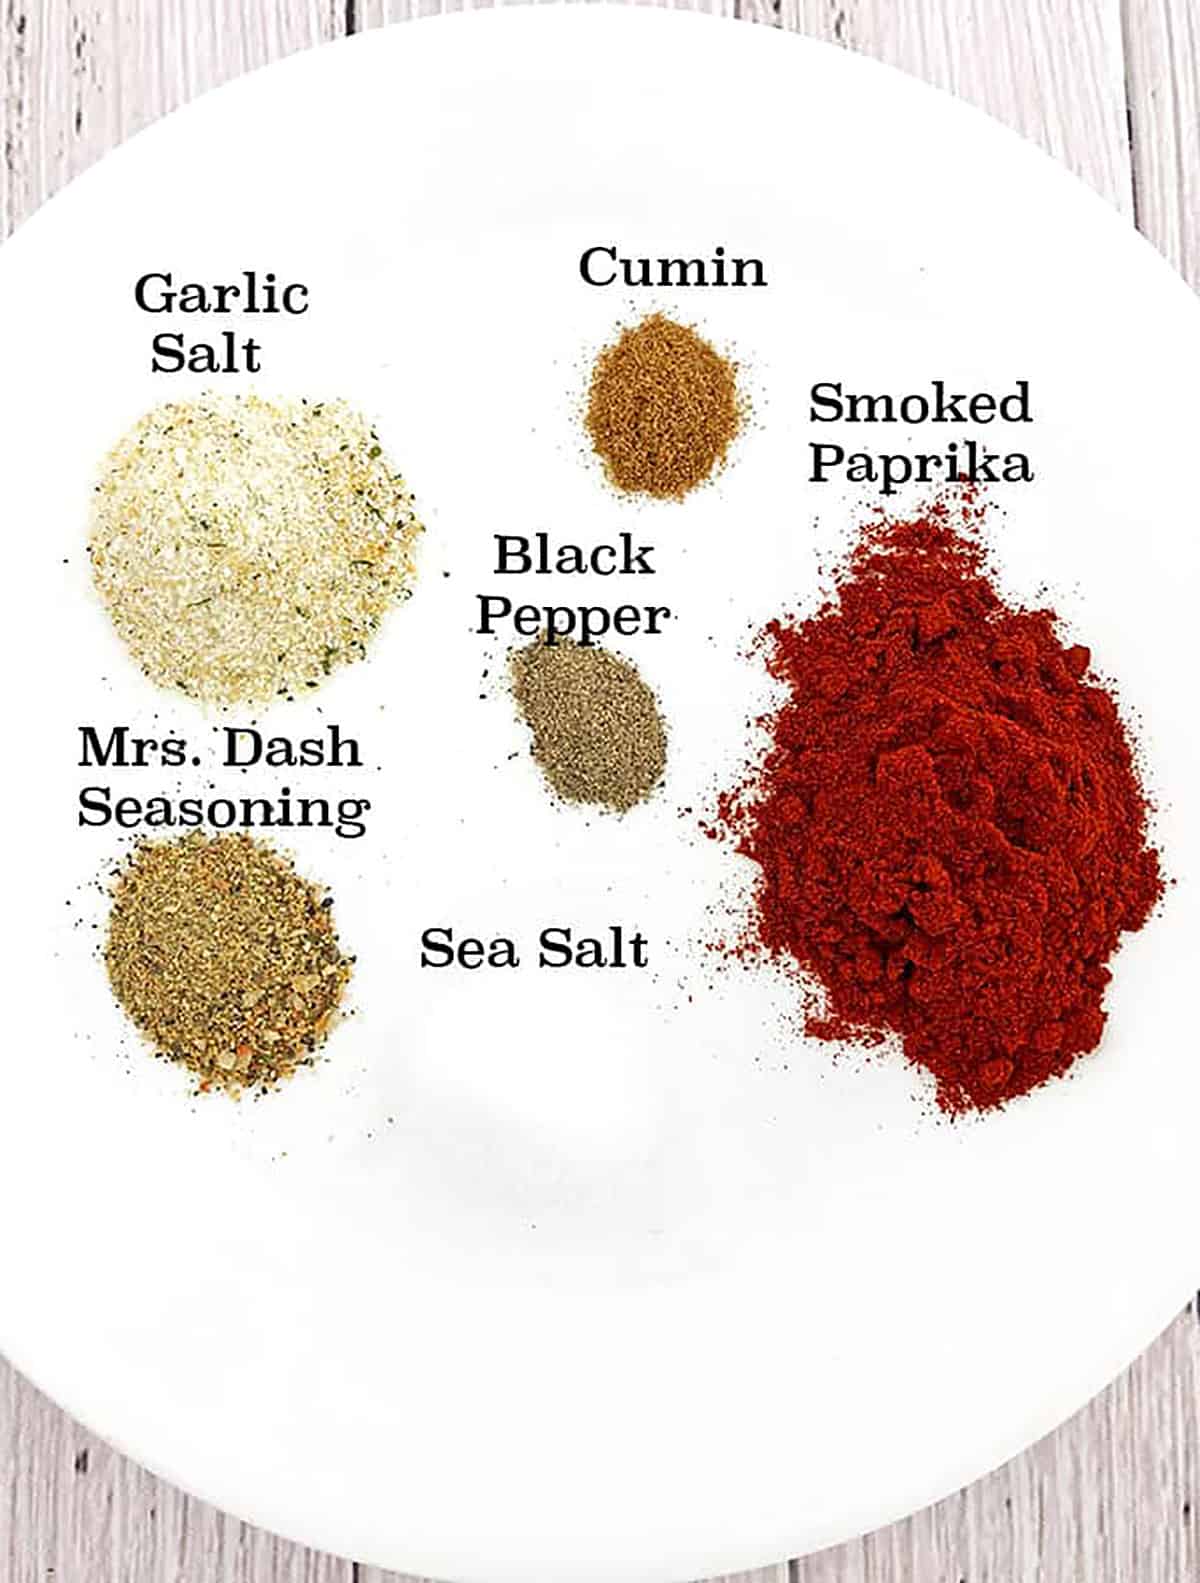 Start by measuring out all the seasoning ingredients, mix them well together, and set aside until ready for use.